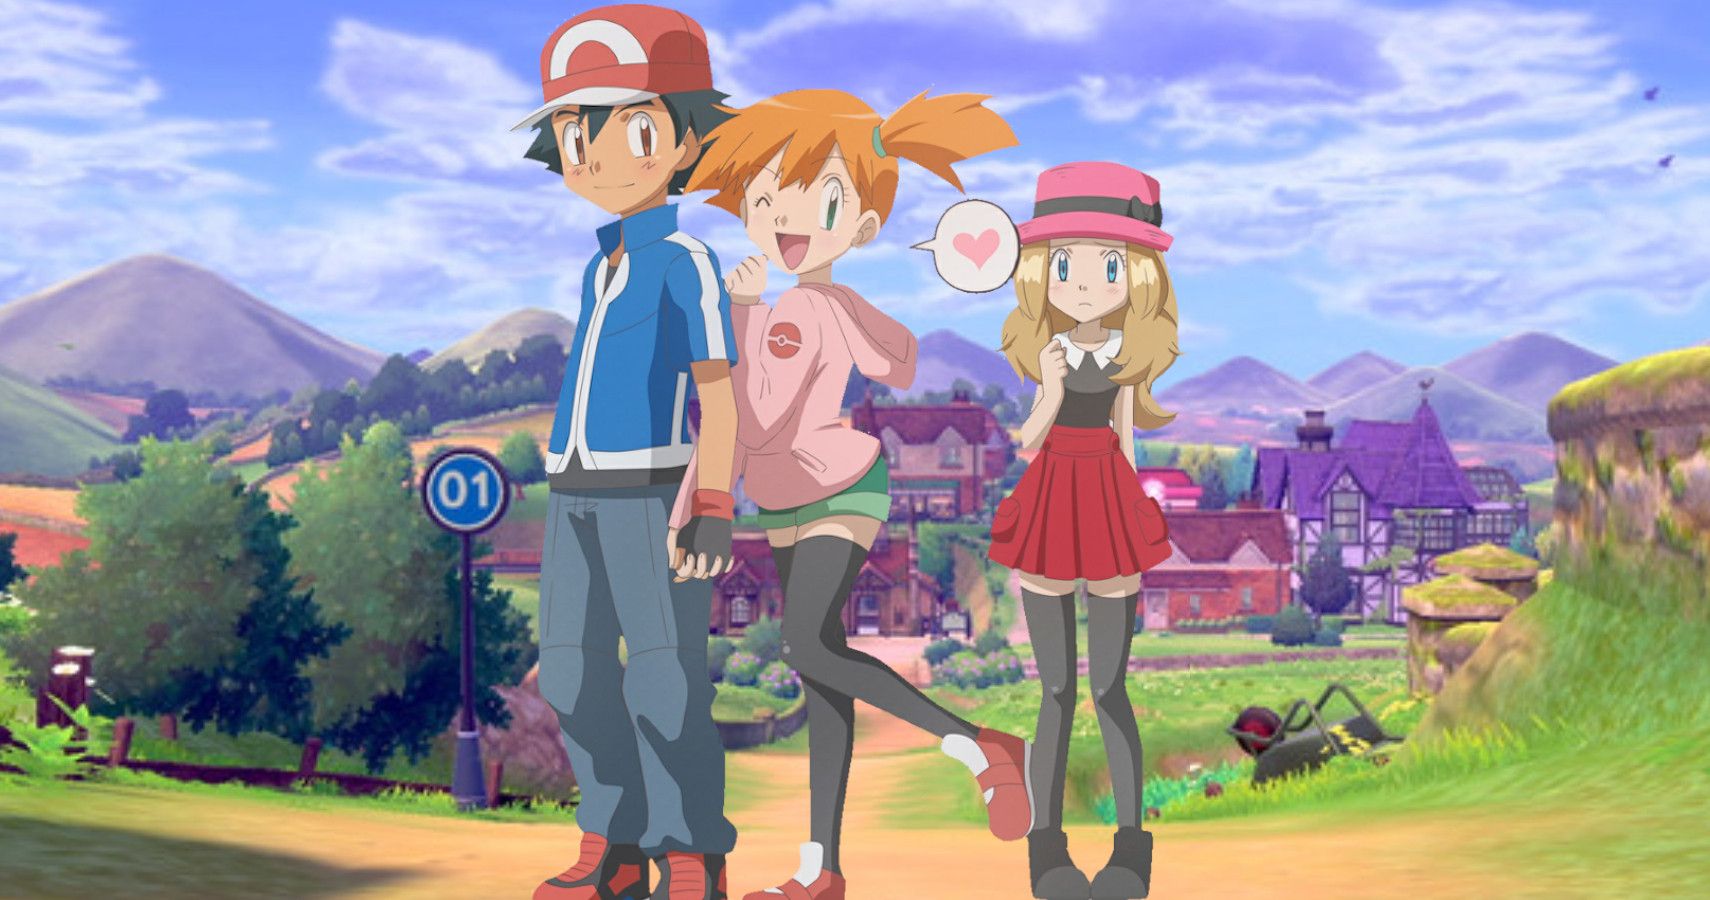 Who Will Ash End Up With When The Pokémon Anime Ends?